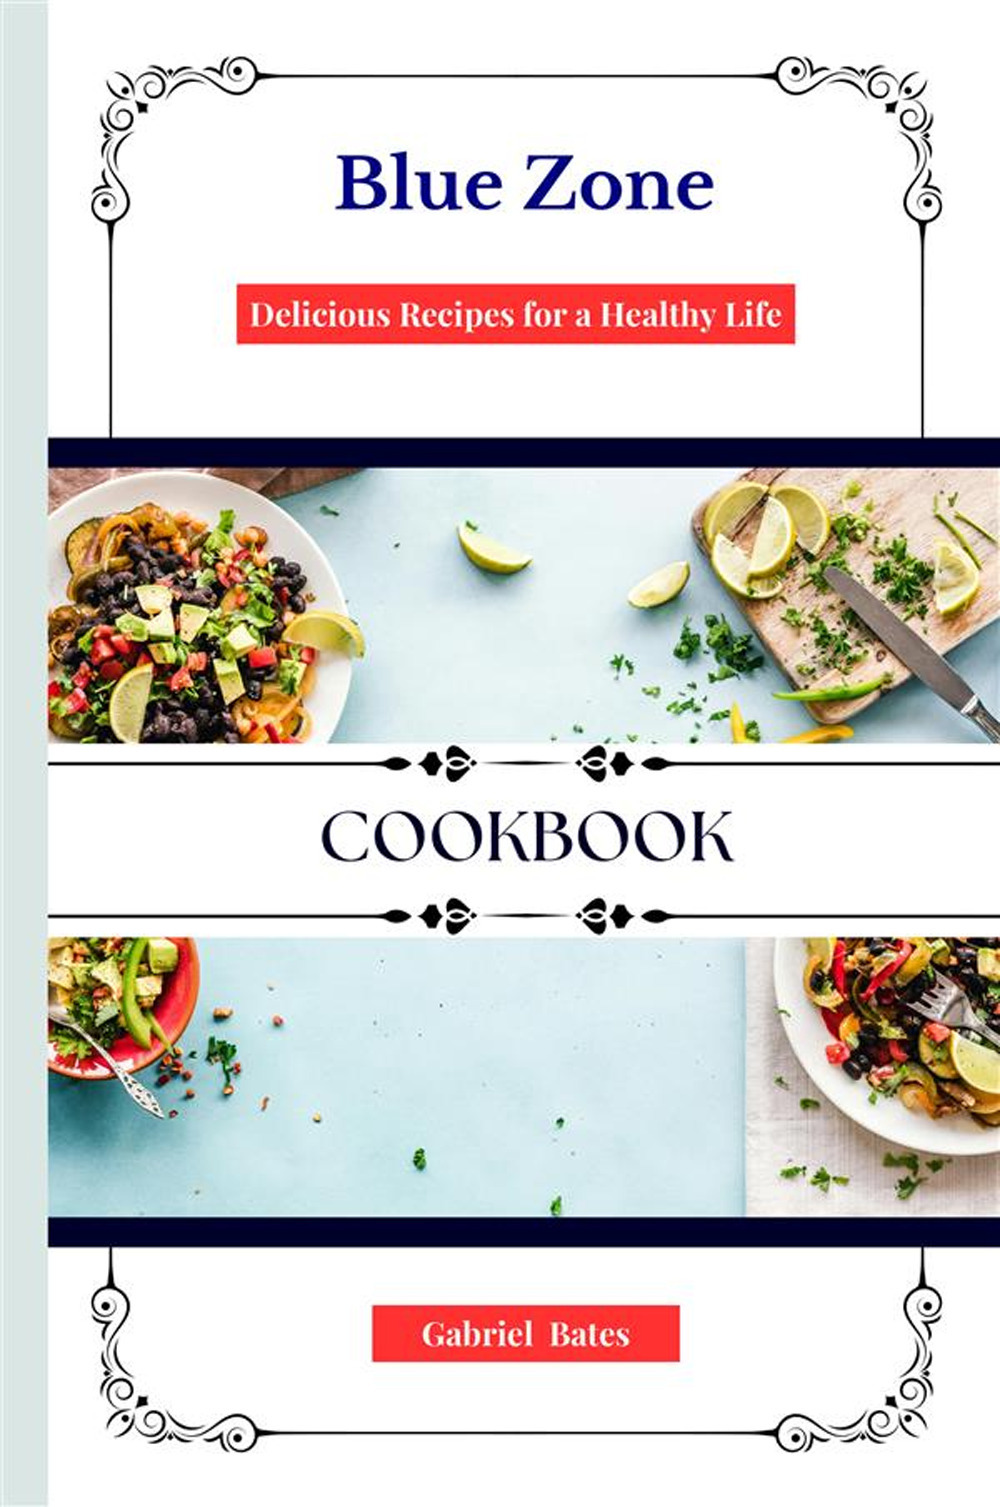 Blue zone cookbook. Delicious recipes for a healthy Life